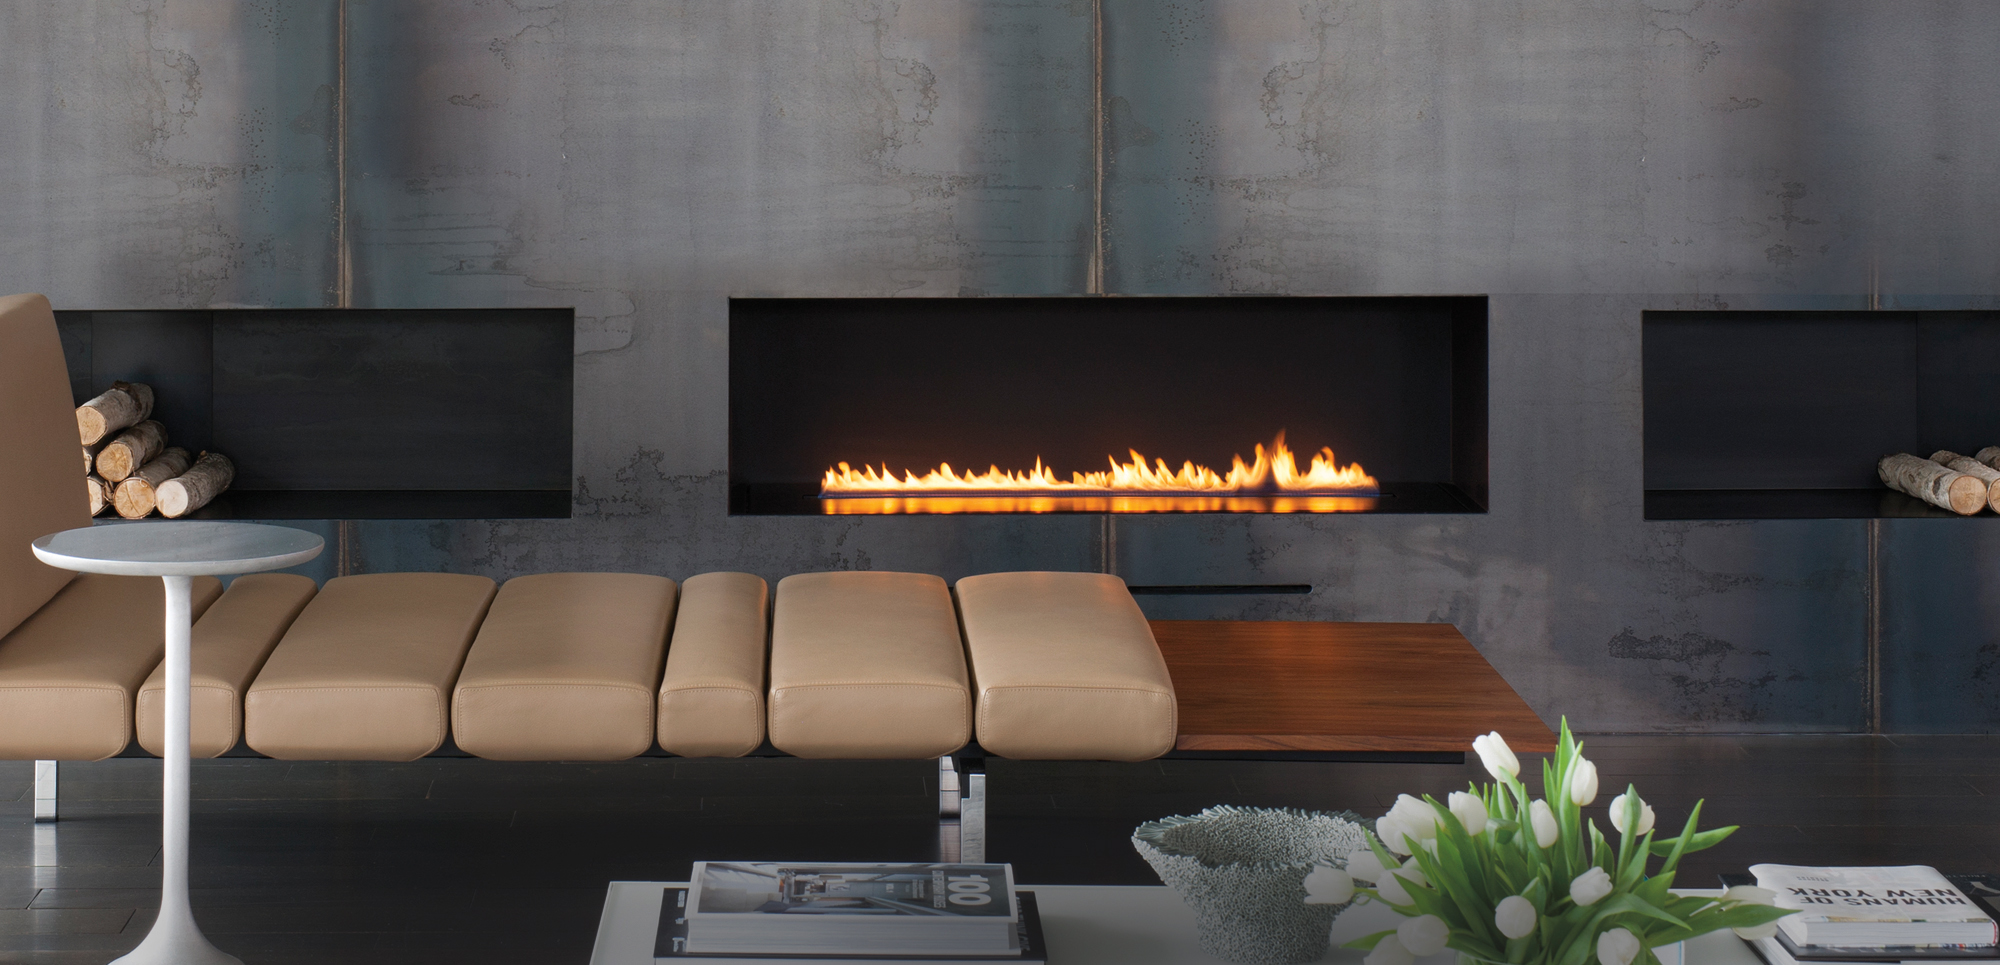 How to Build A Gas Fireplace Inspirational Spark Modern Fires